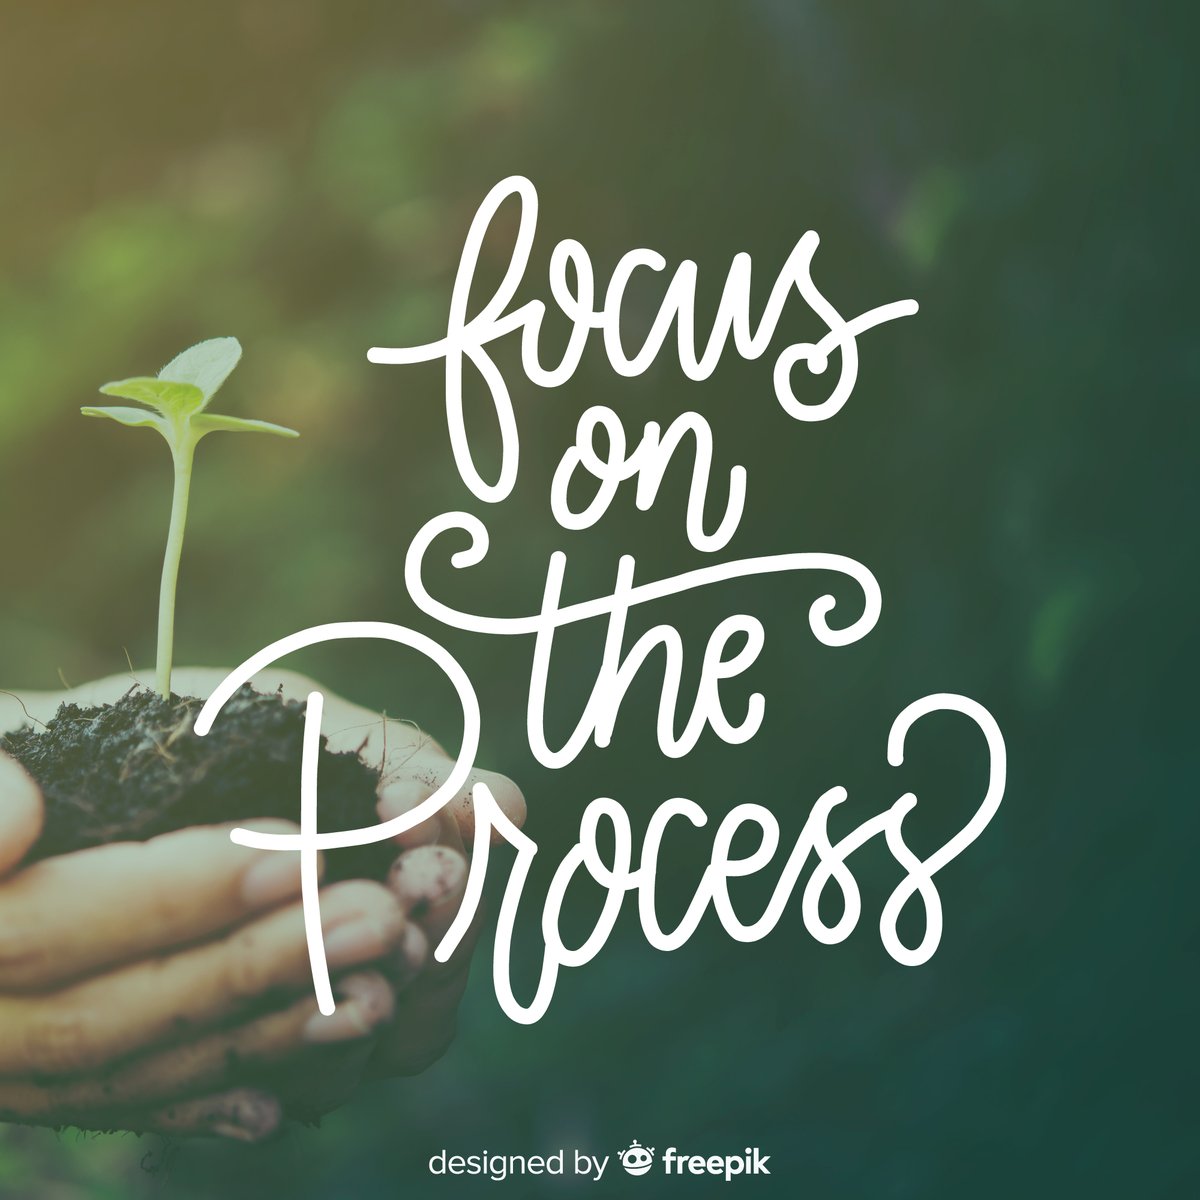 Focus on the process.
#farmquotes #doitright #agriculture